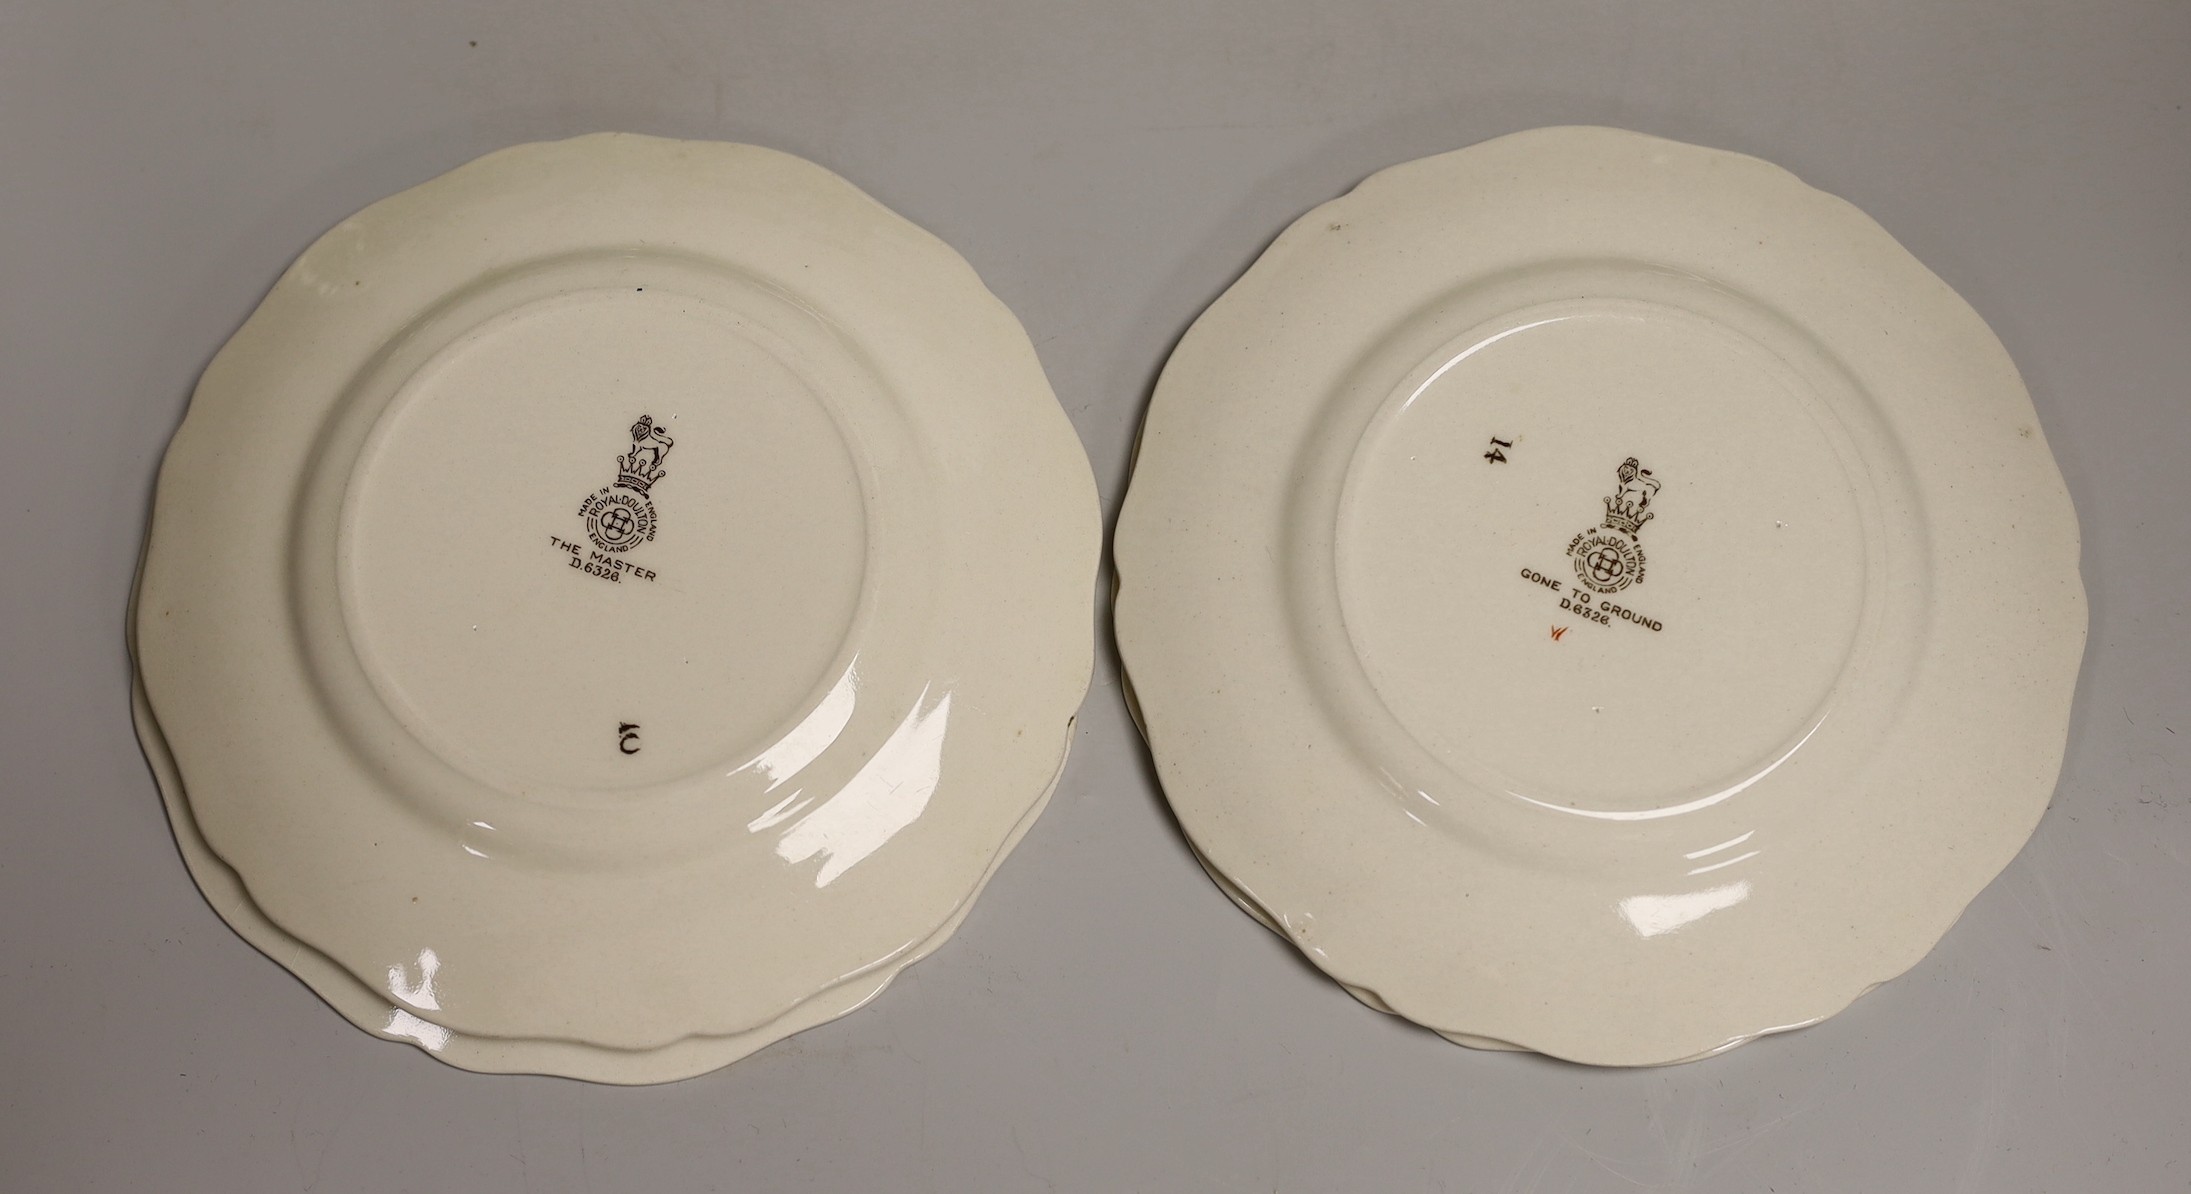 A Royal Doulton series ware hunting sandwich set signed Charles Simpson, D6326